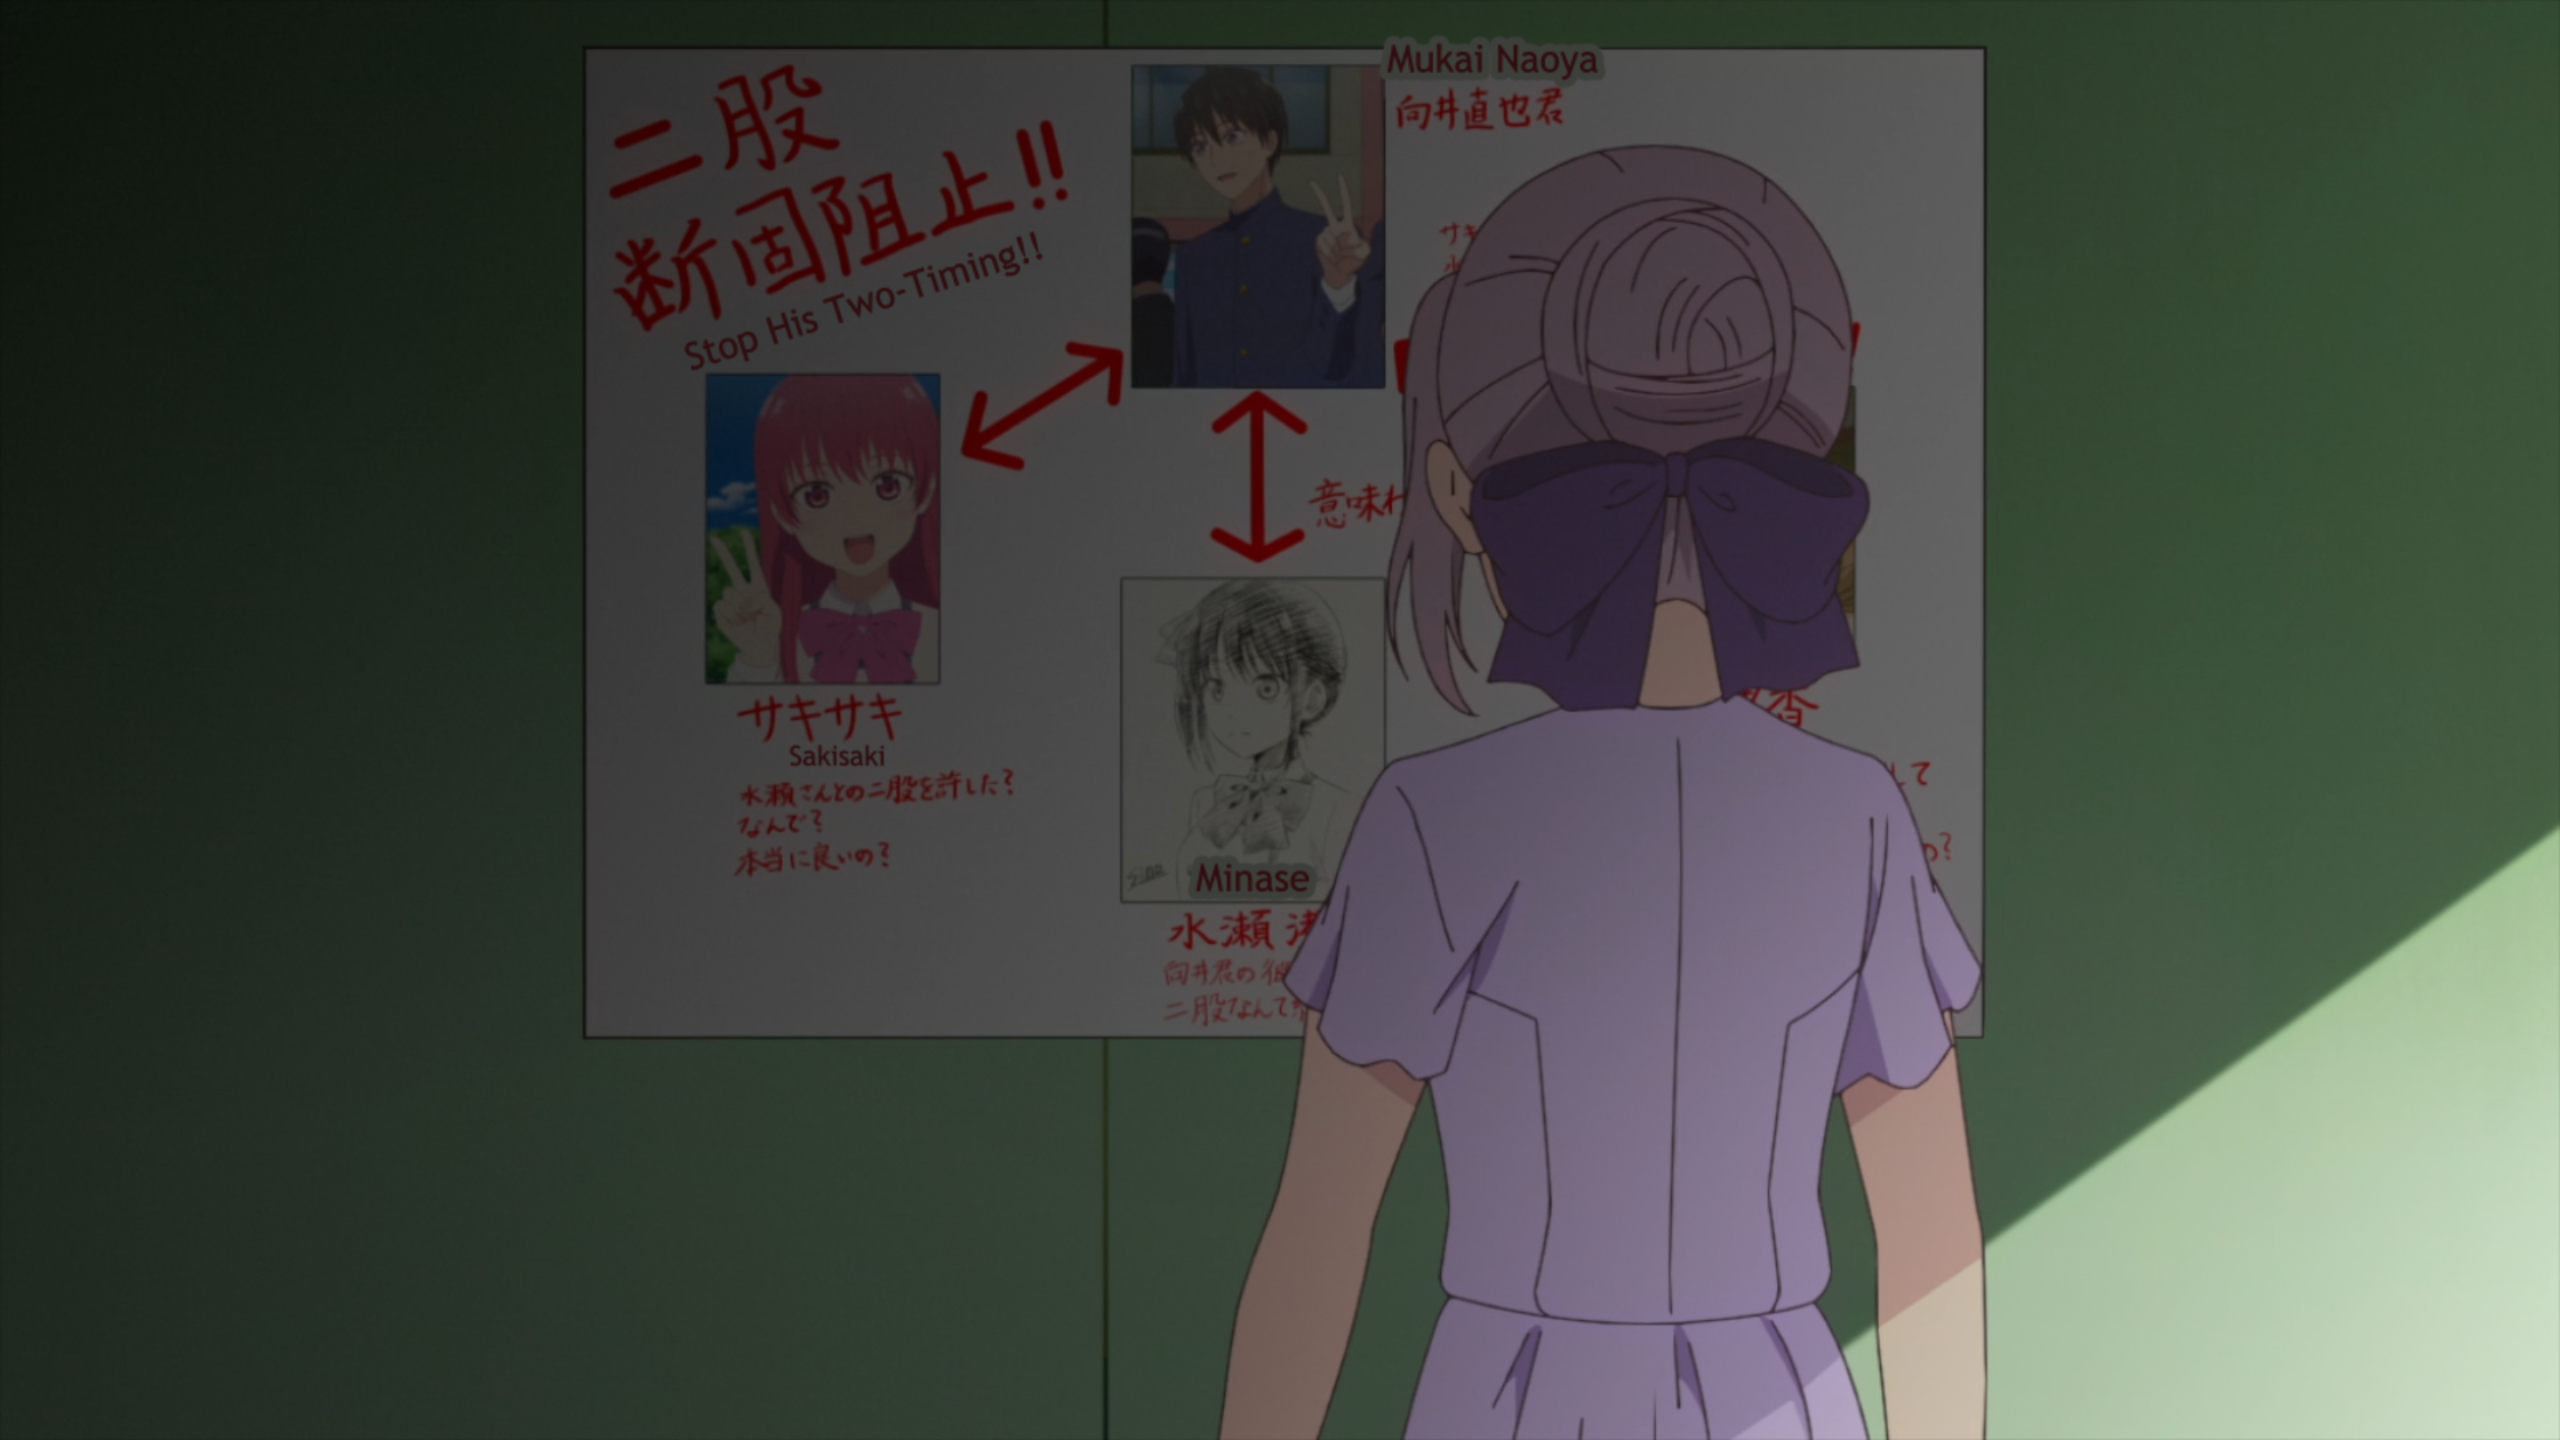 Shino looking at a whiteboard with pictures of Naoya and his harem